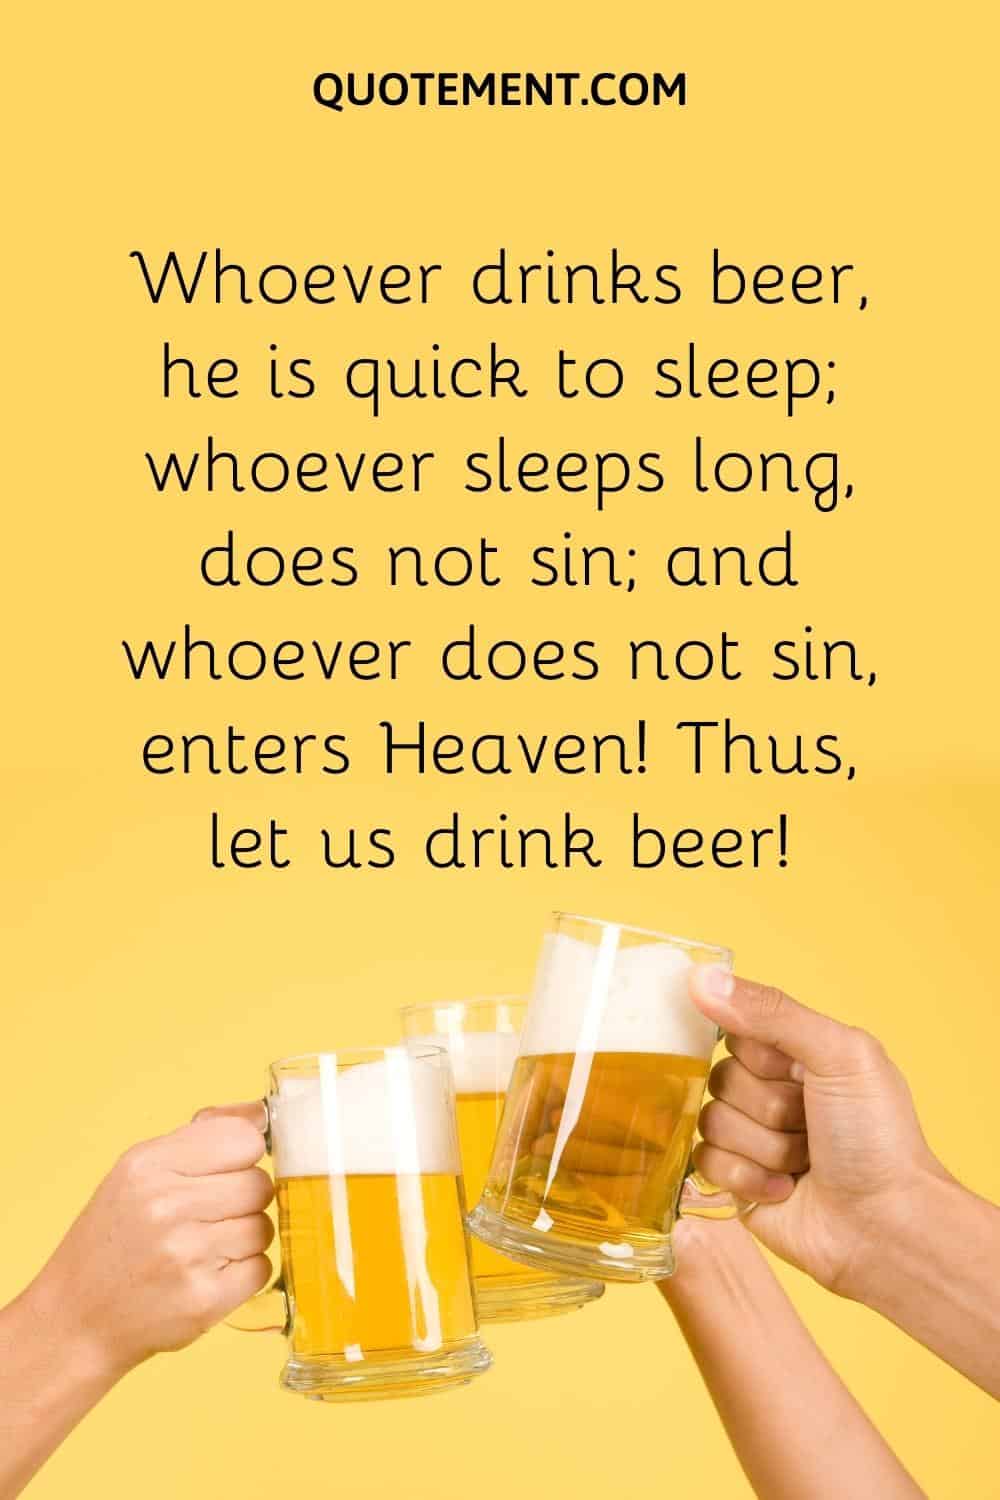 Whoever drinks beer, he is quick to sleep; whoever sleeps long, does not sin; and whoever does not sin, enters Heaven! Thus, let us drink beer!